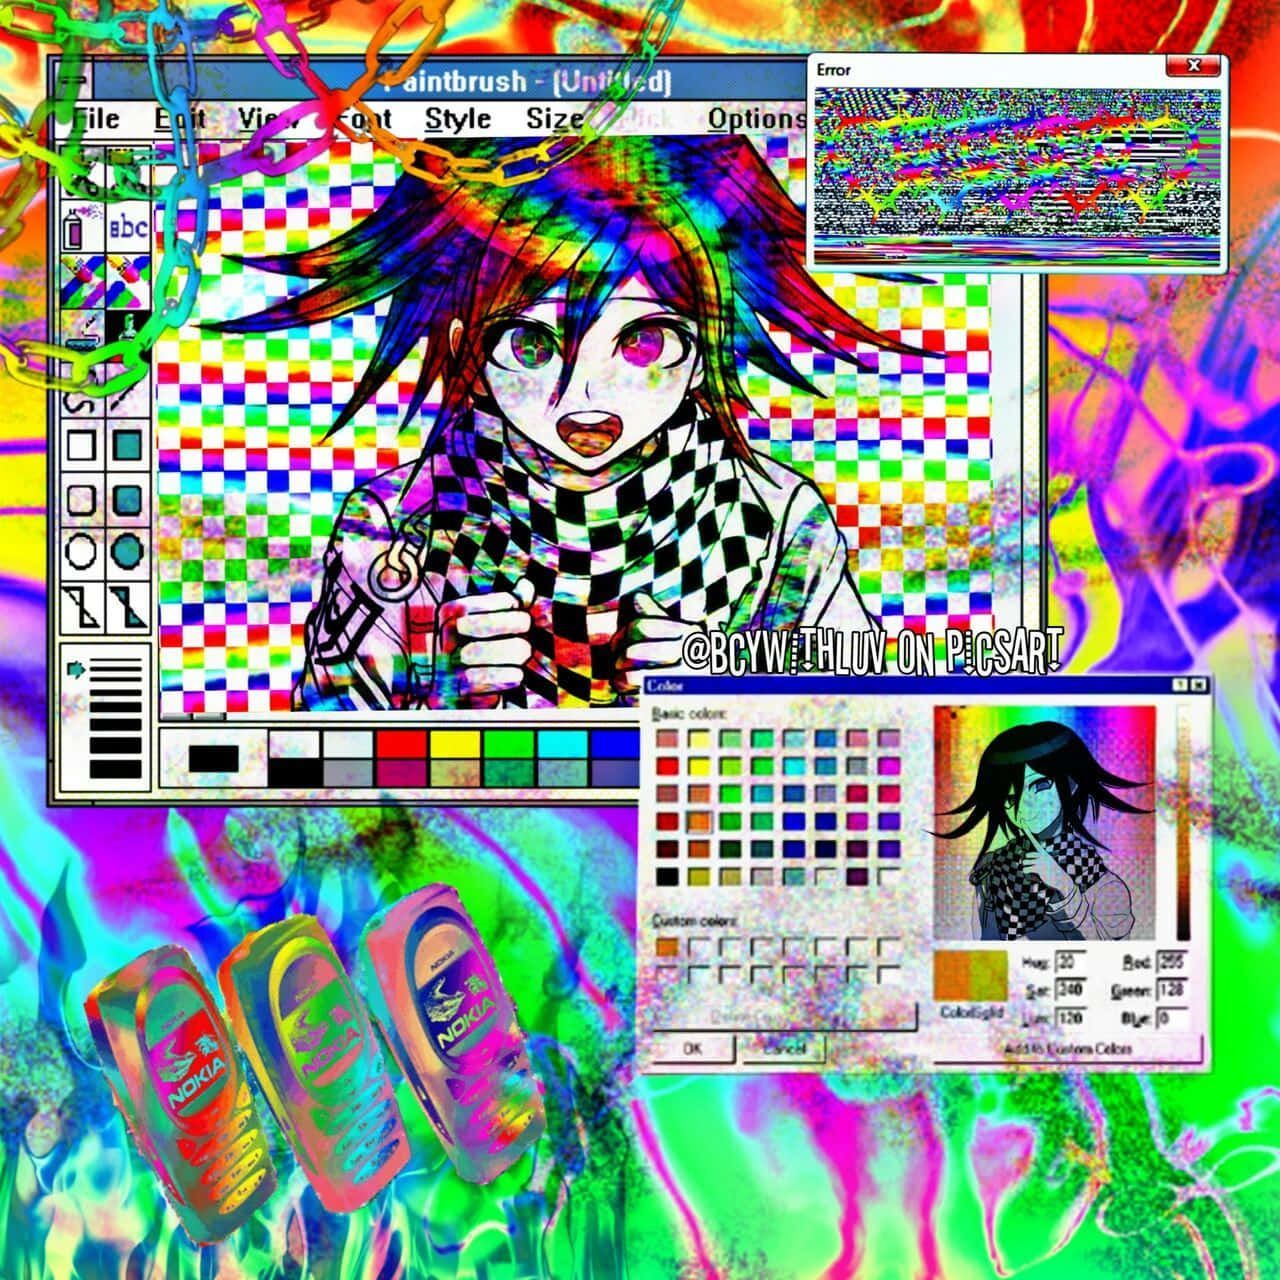 A computer screen with an image of colorful art - Webcore